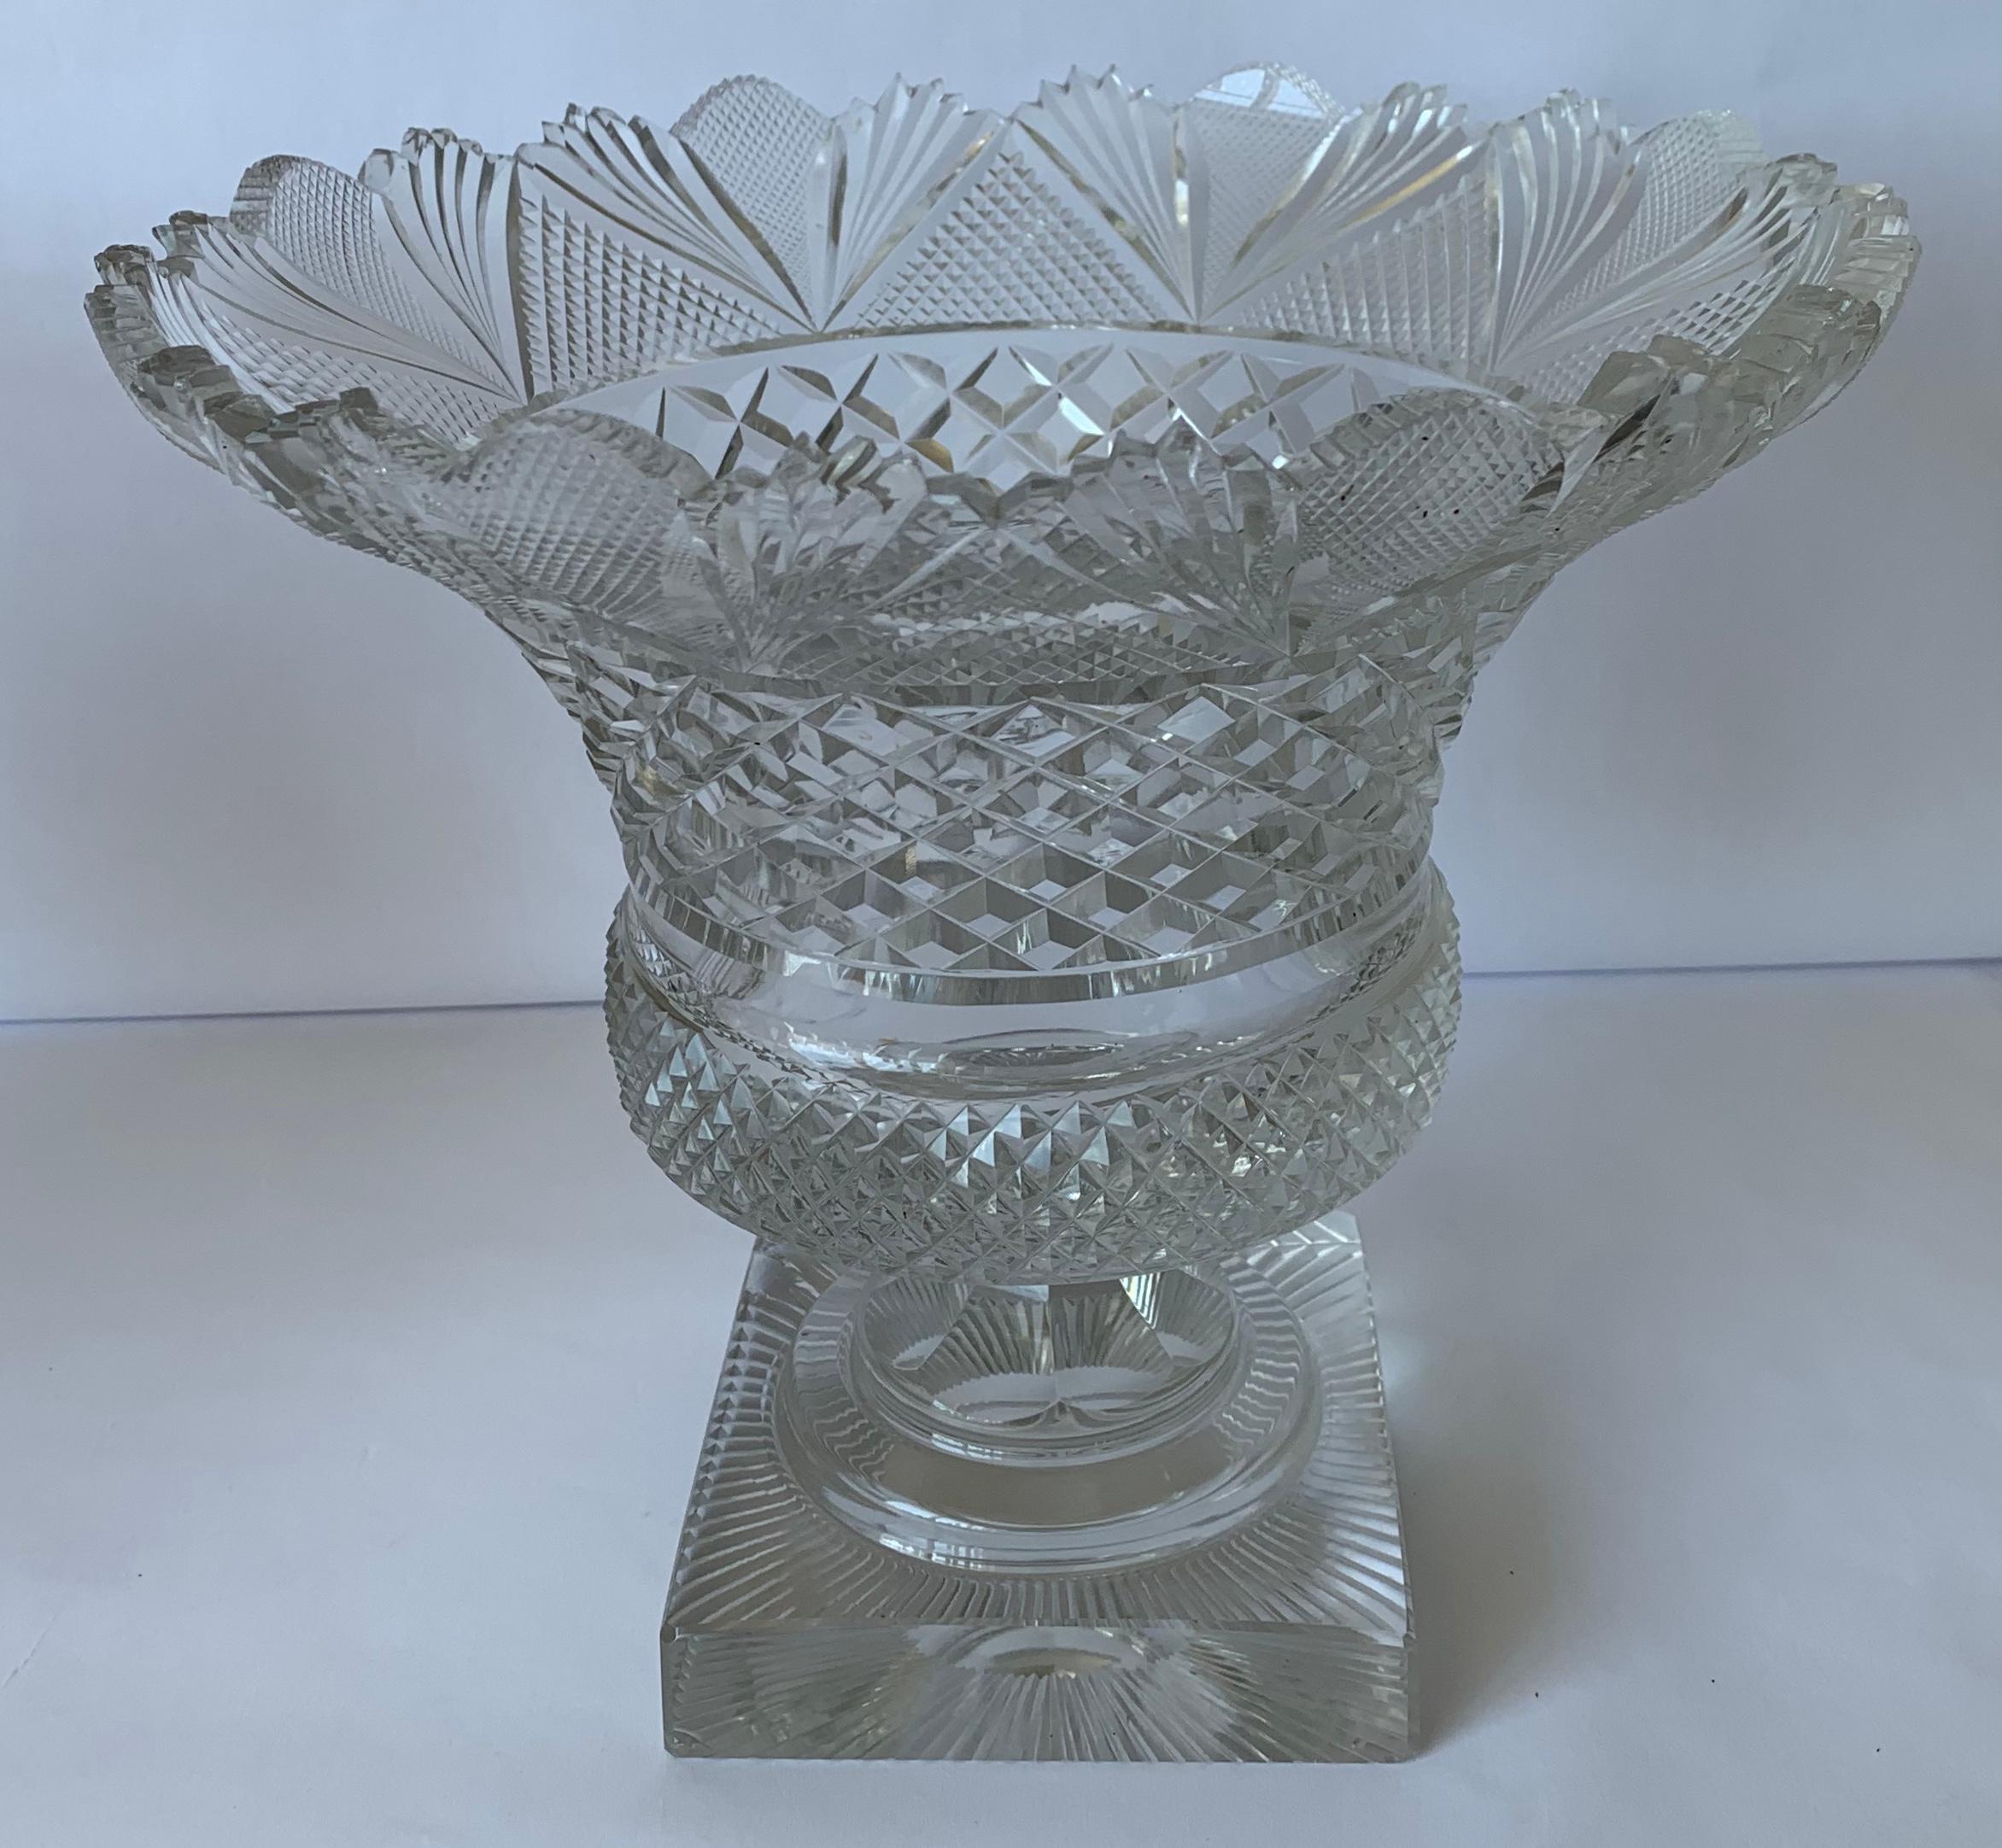 19th century Anglo-Irish cut crystal footed bowl. Alternating cut prisms with excellent cutting throughout. Round stepped base on square plinth. No makers mark or signature.